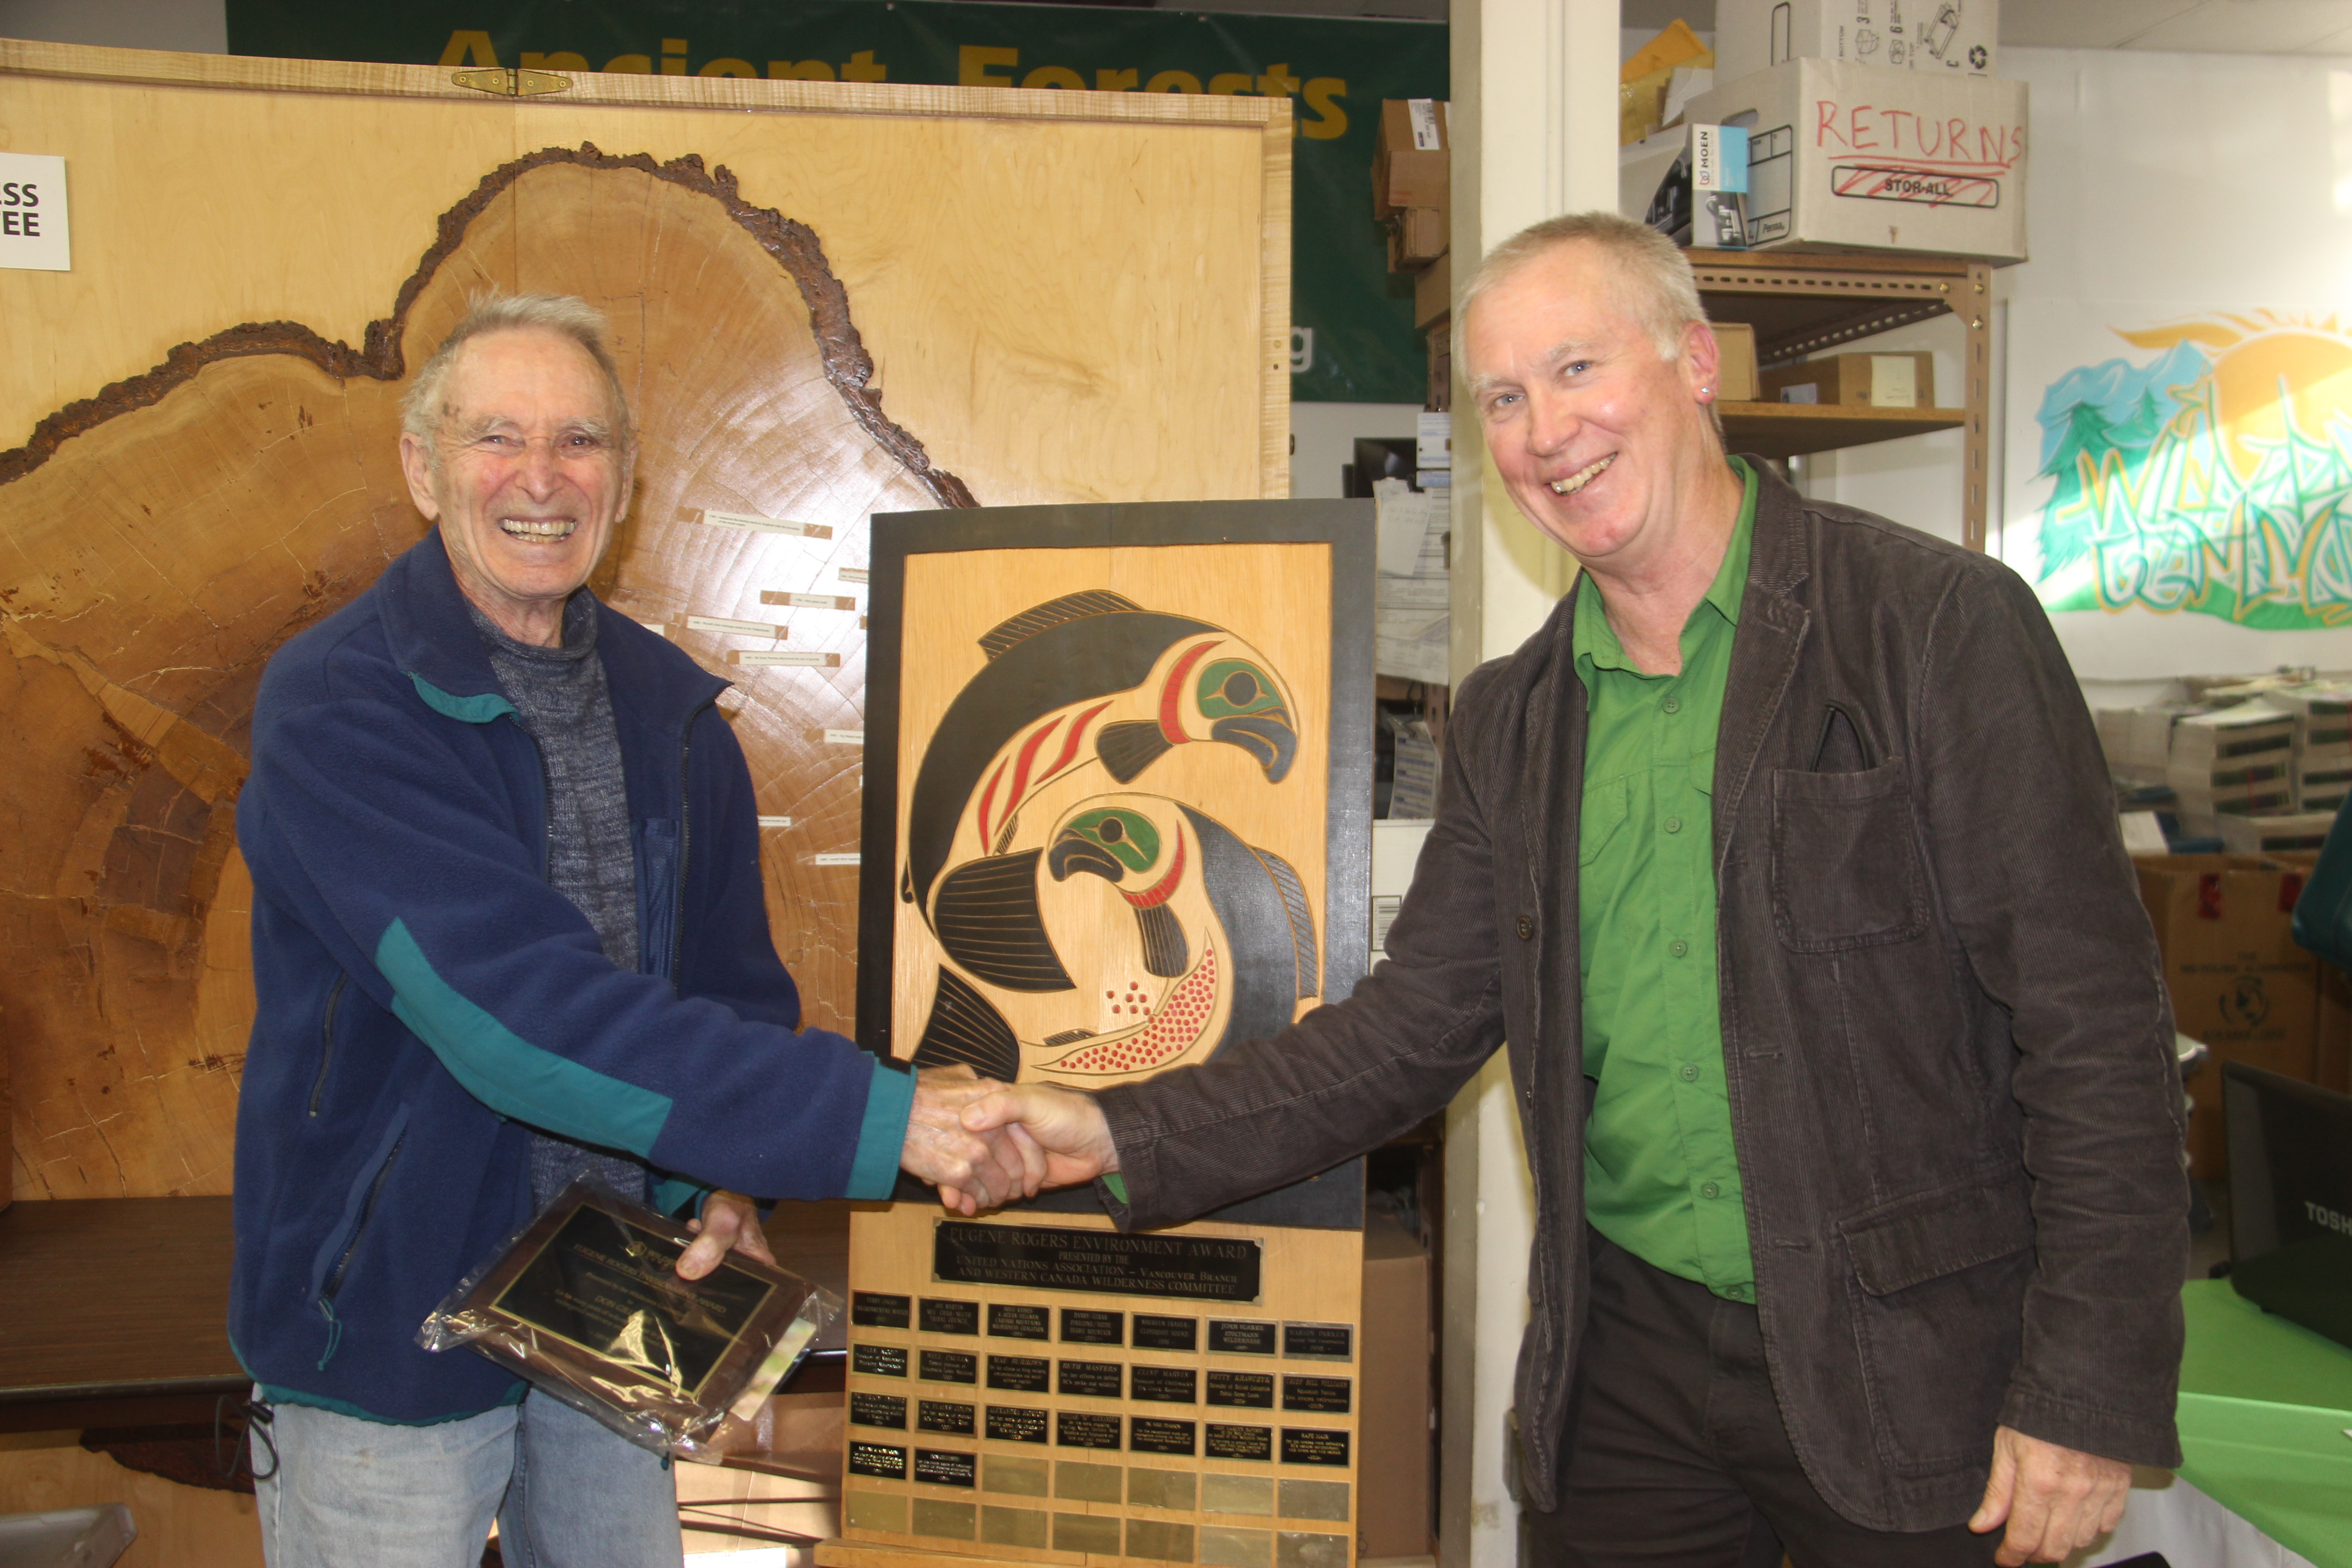 Joe Foy and Don Gillespie shaking hands in front of the Eugene Rogers award plaque at the Wilderness Committee head offce